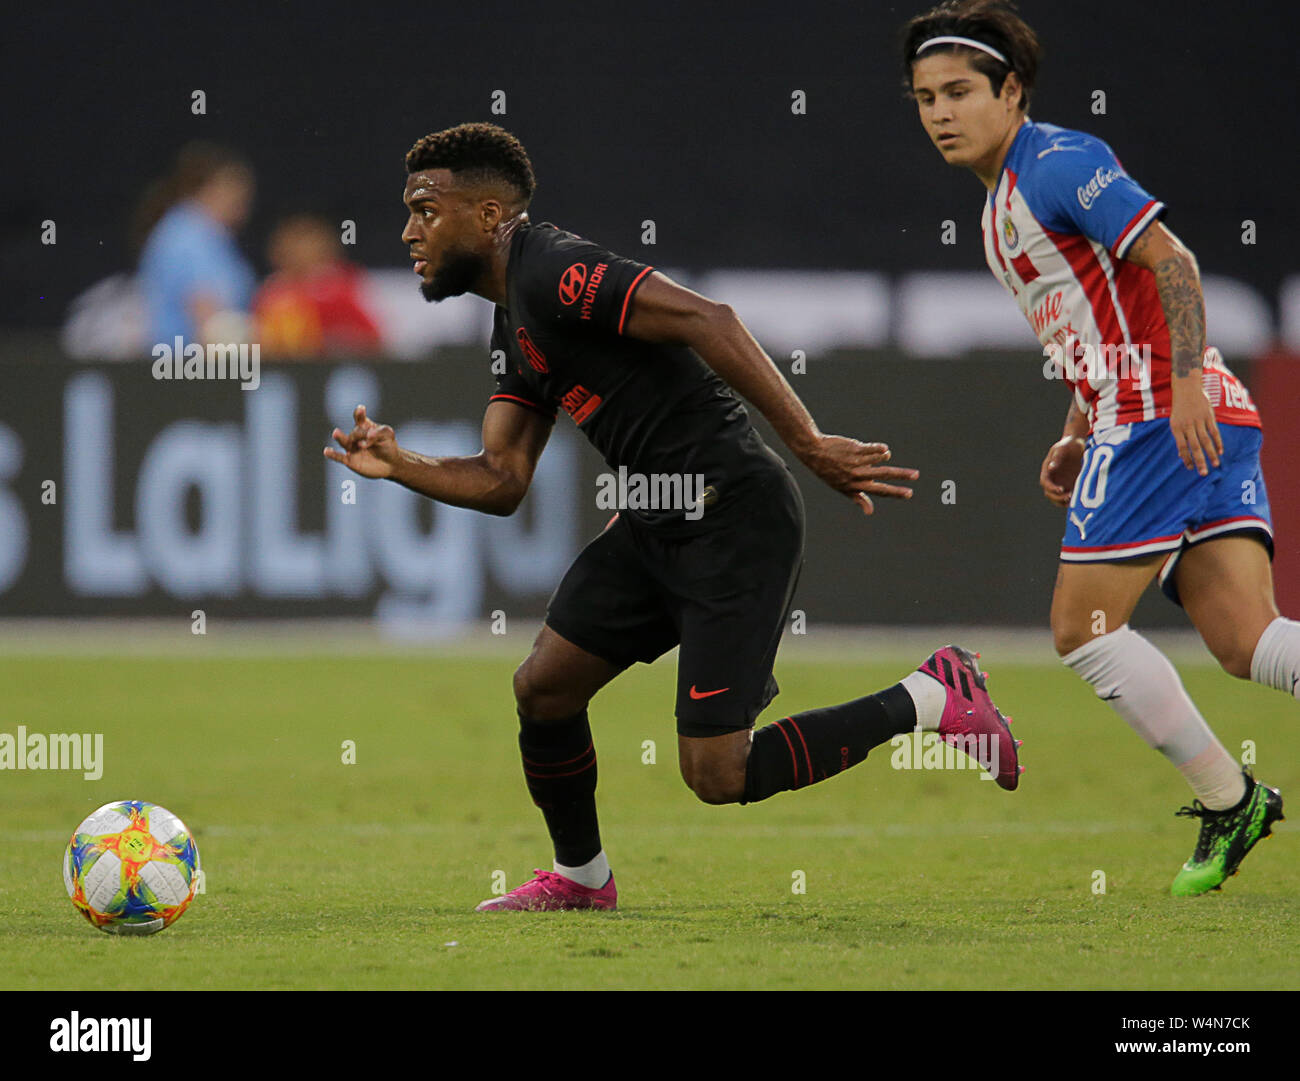 Arlington, Texas, USA. 23rd July, 2019. July 23, 2019, Arlington, Texas, United States; Thomas Lemar (11) escapes Javier Lopez (10) during the first half of the International Champions Cup match between Chivas de Guadalajara and AtlÅ½tico de Madrid at Globe Life Park in Arlington, Tx. Credit: Ralph Lauer/ZUMA Wire/Alamy Live News Stock Photo